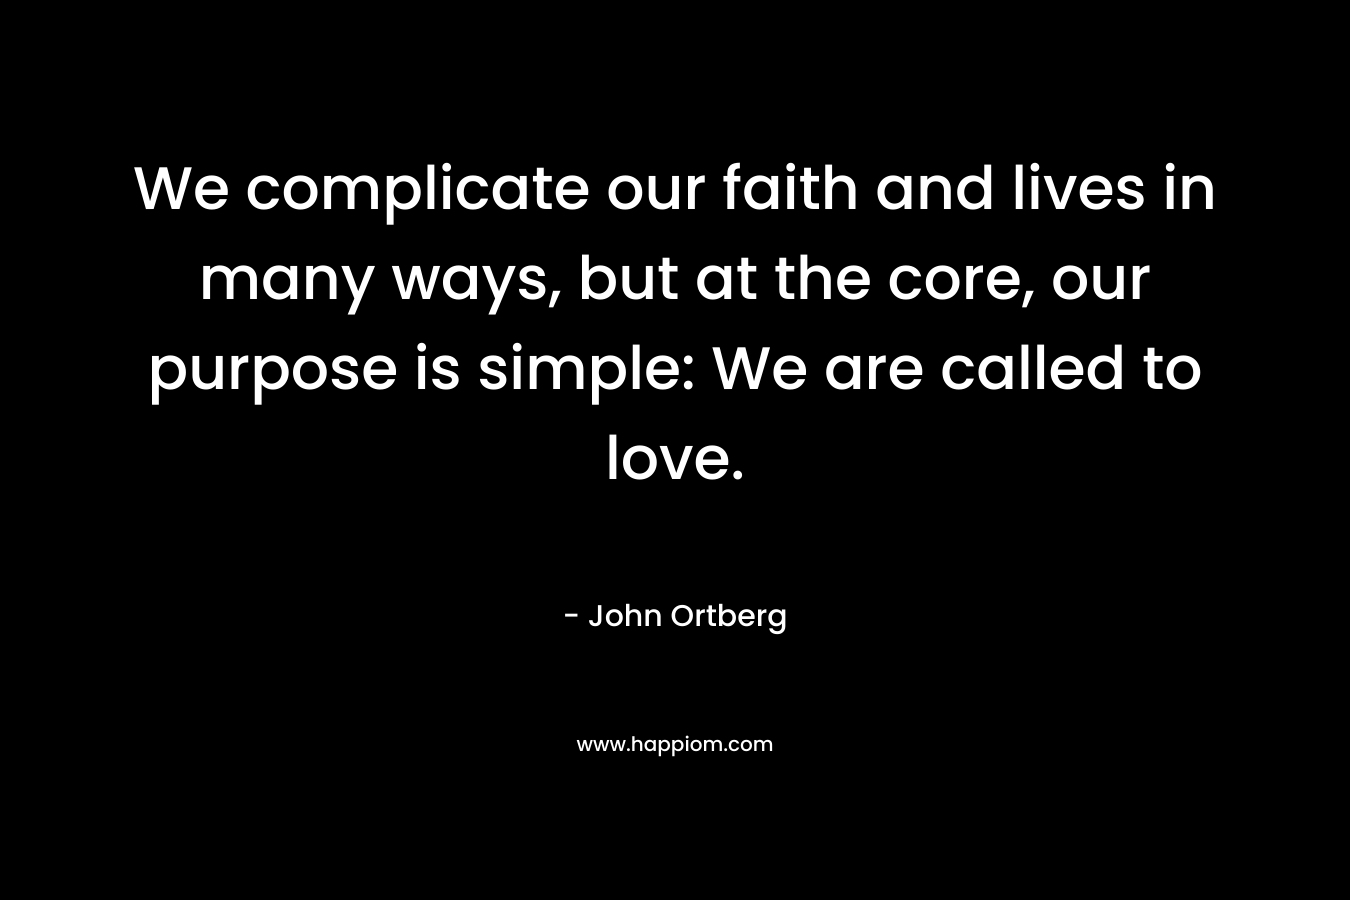 We complicate our faith and lives in many ways, but at the core, our purpose is simple: We are called to love.